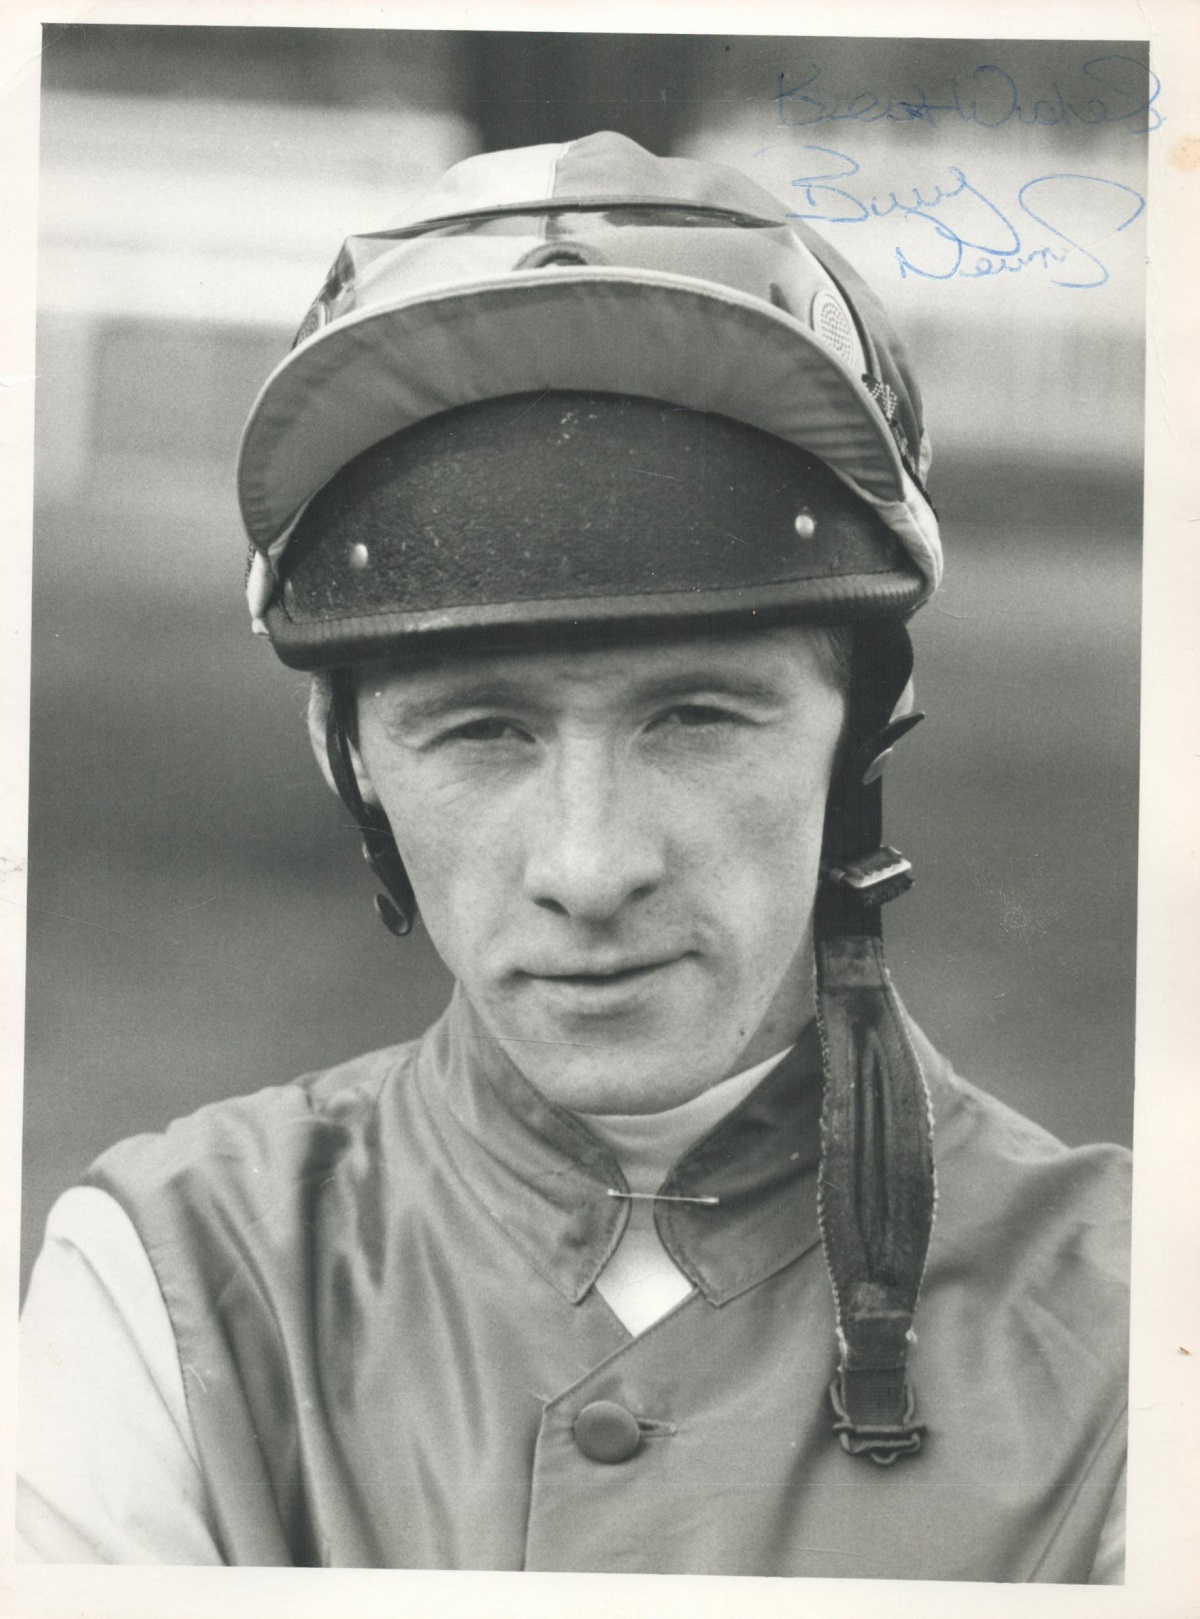 Jockey Billy Newnes Signed 8x6 Black and White photo. Newnes (born Liverpool, 6 December 1959) is an